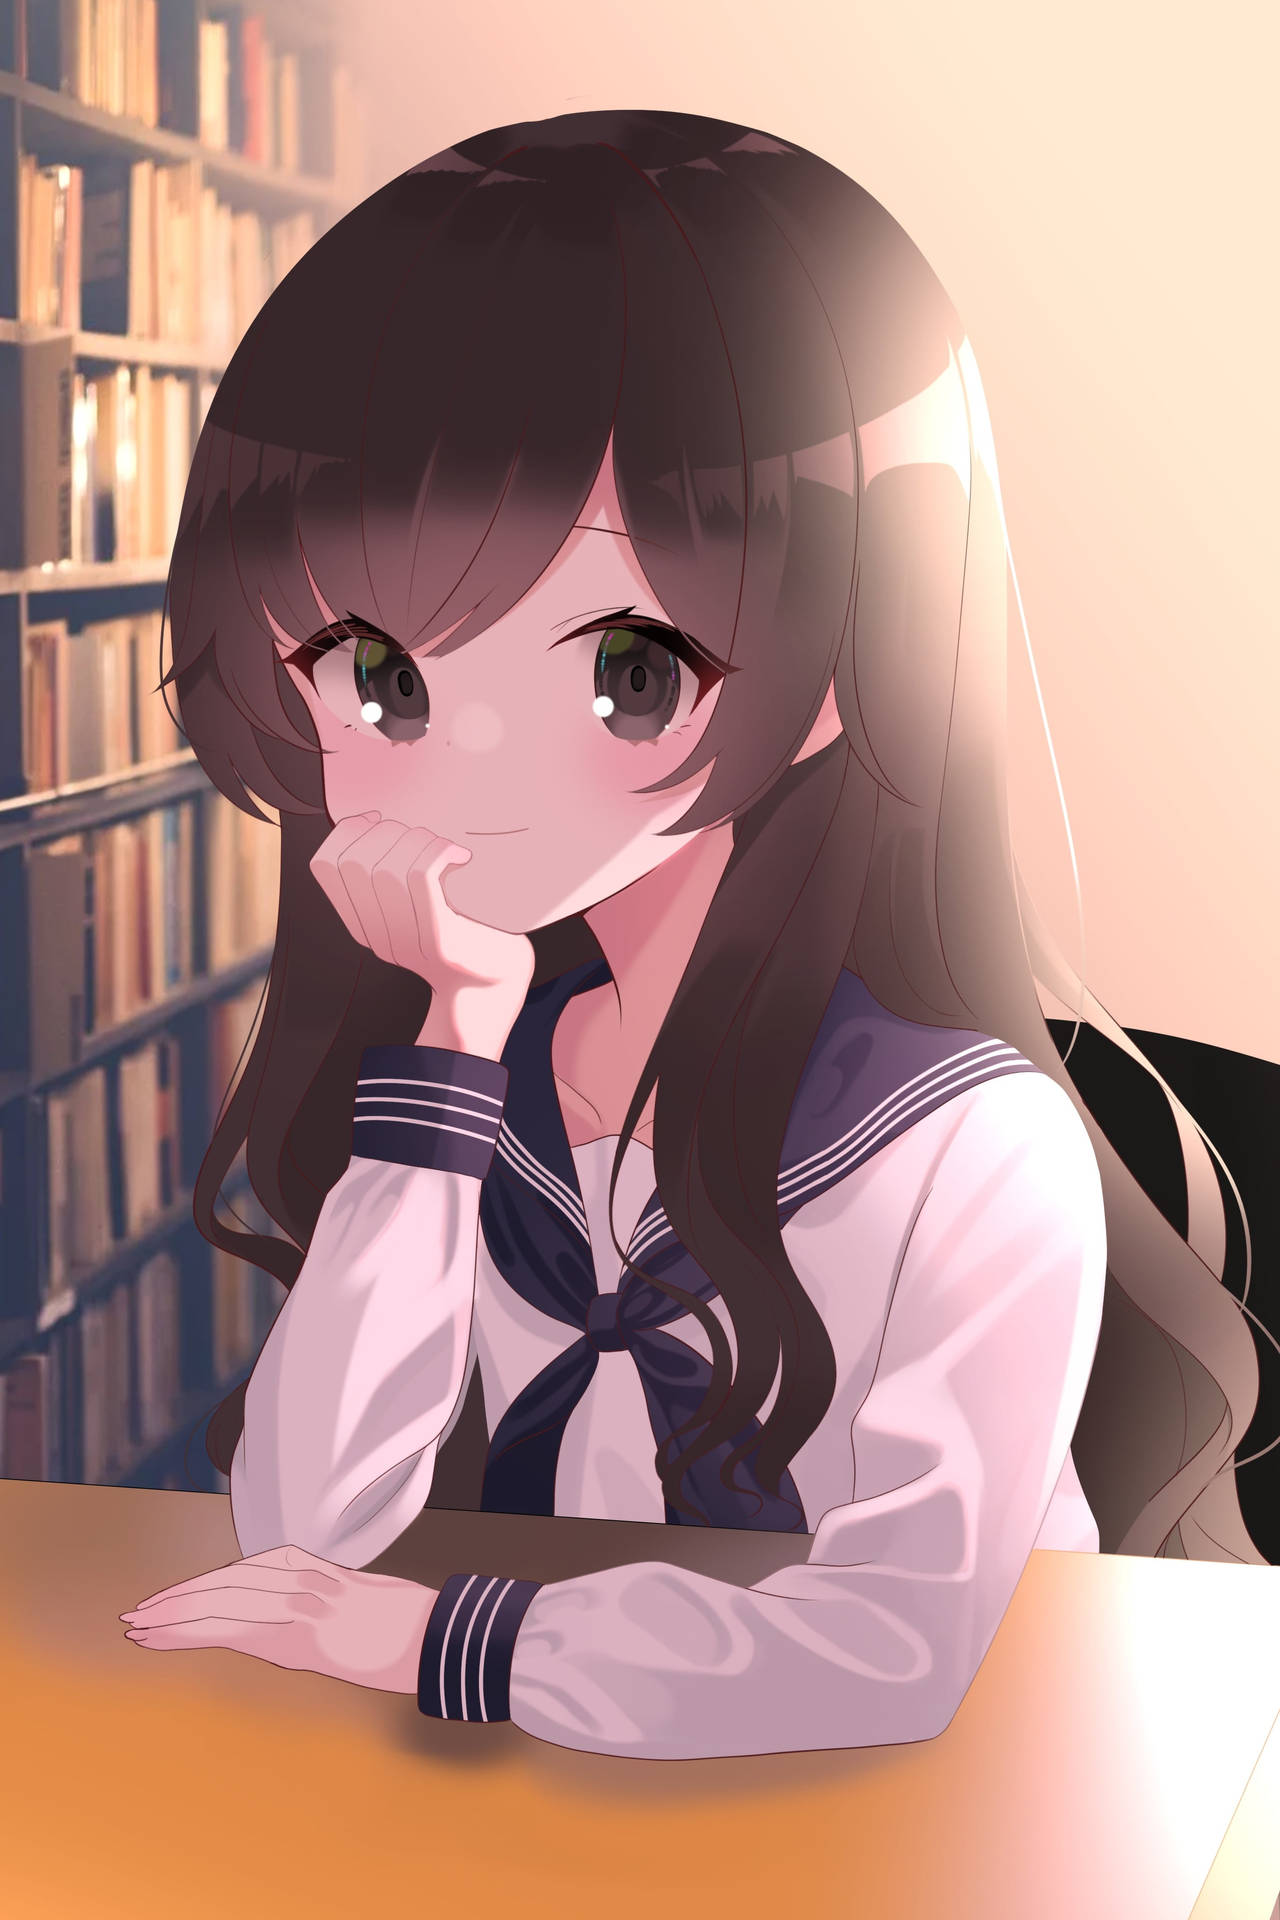 Anime School Scenery Kawaii Girl In Library Picture